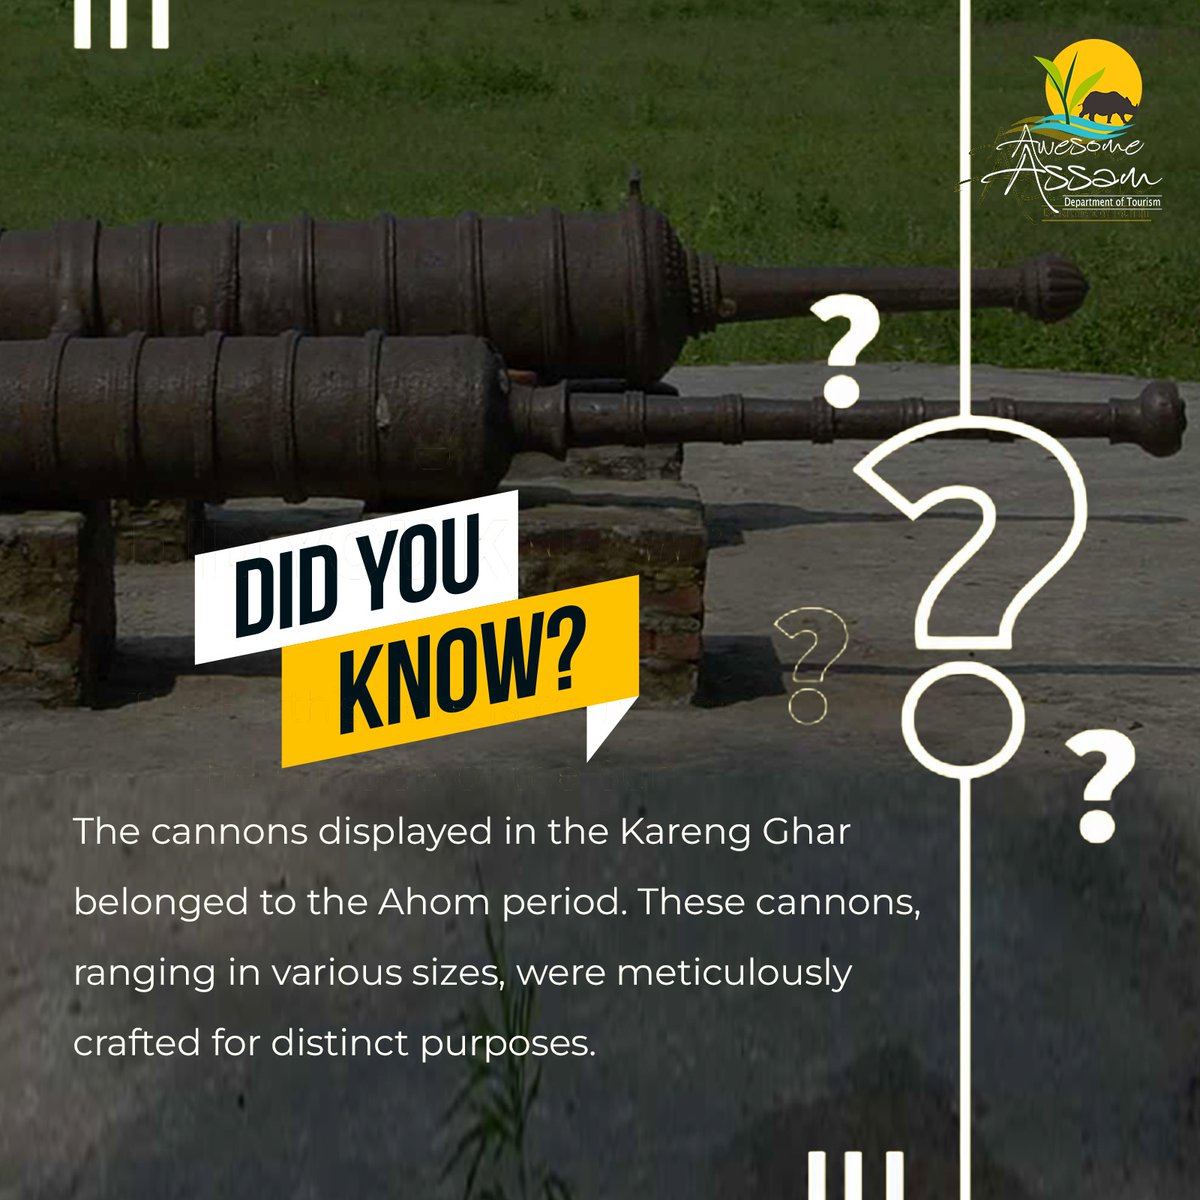 Step back in time to the Ahom period and discover the remarkable cannons showcased in Kareng Ghar!

#AwesomeAssam #AssamTourism #Assam #VisitAssam #Cannons #AhomPeriod  #ExperienceAssam #WelcomeToAssam #TravelAssam #DestinationAssam